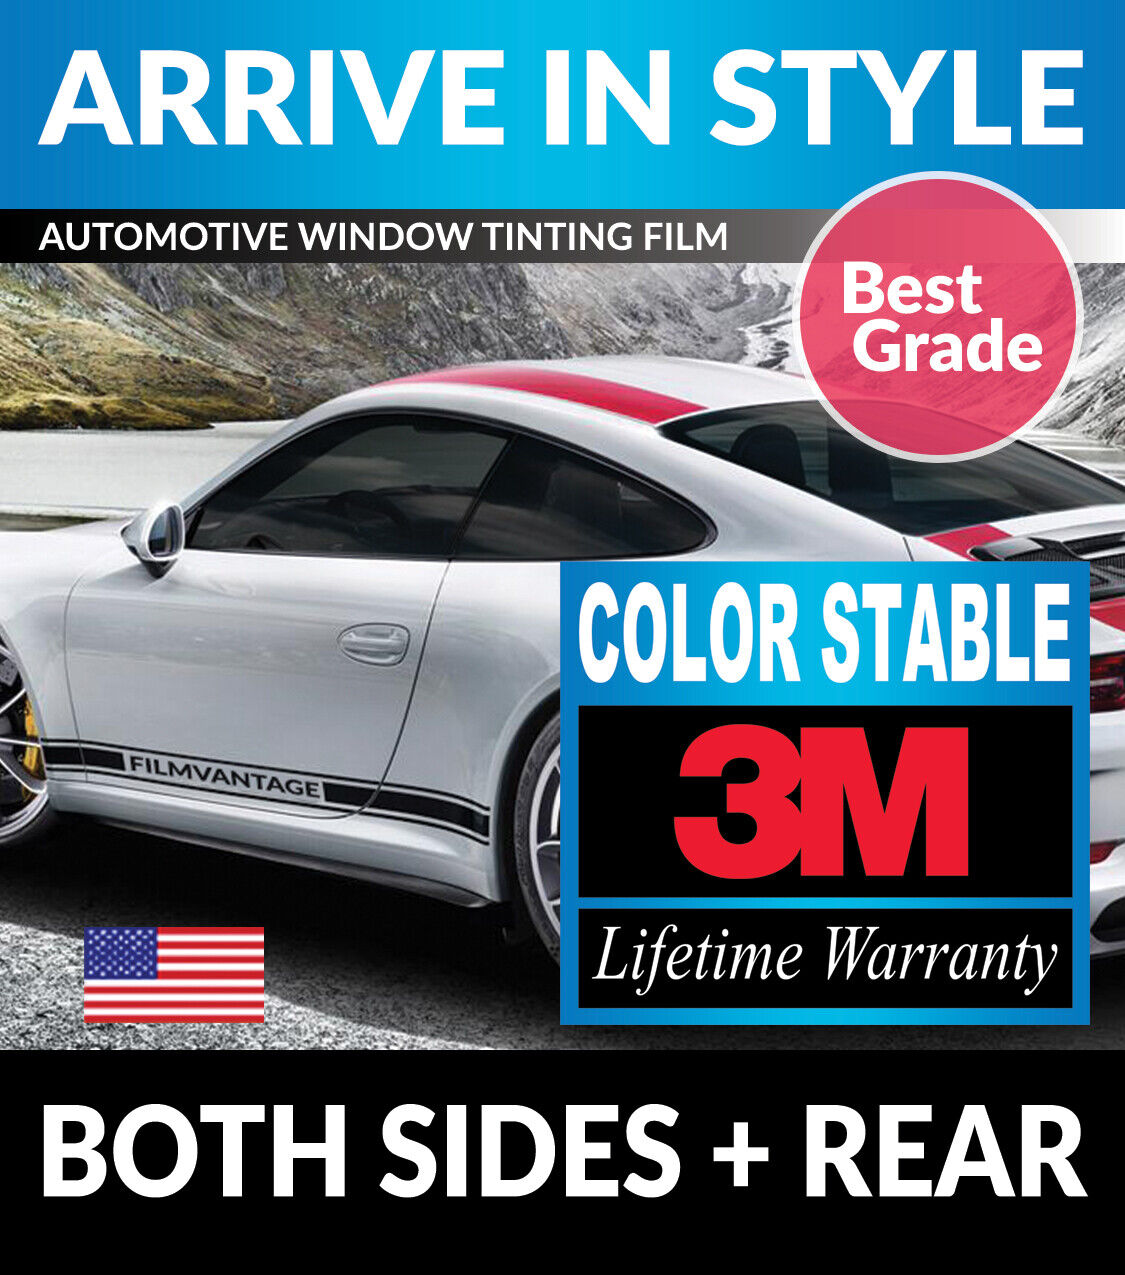 PRECUT WINDOW TINT W/ 3M COLOR STABLE FOR MERCEDES BENZ 400, 500, 600SEL 92-93